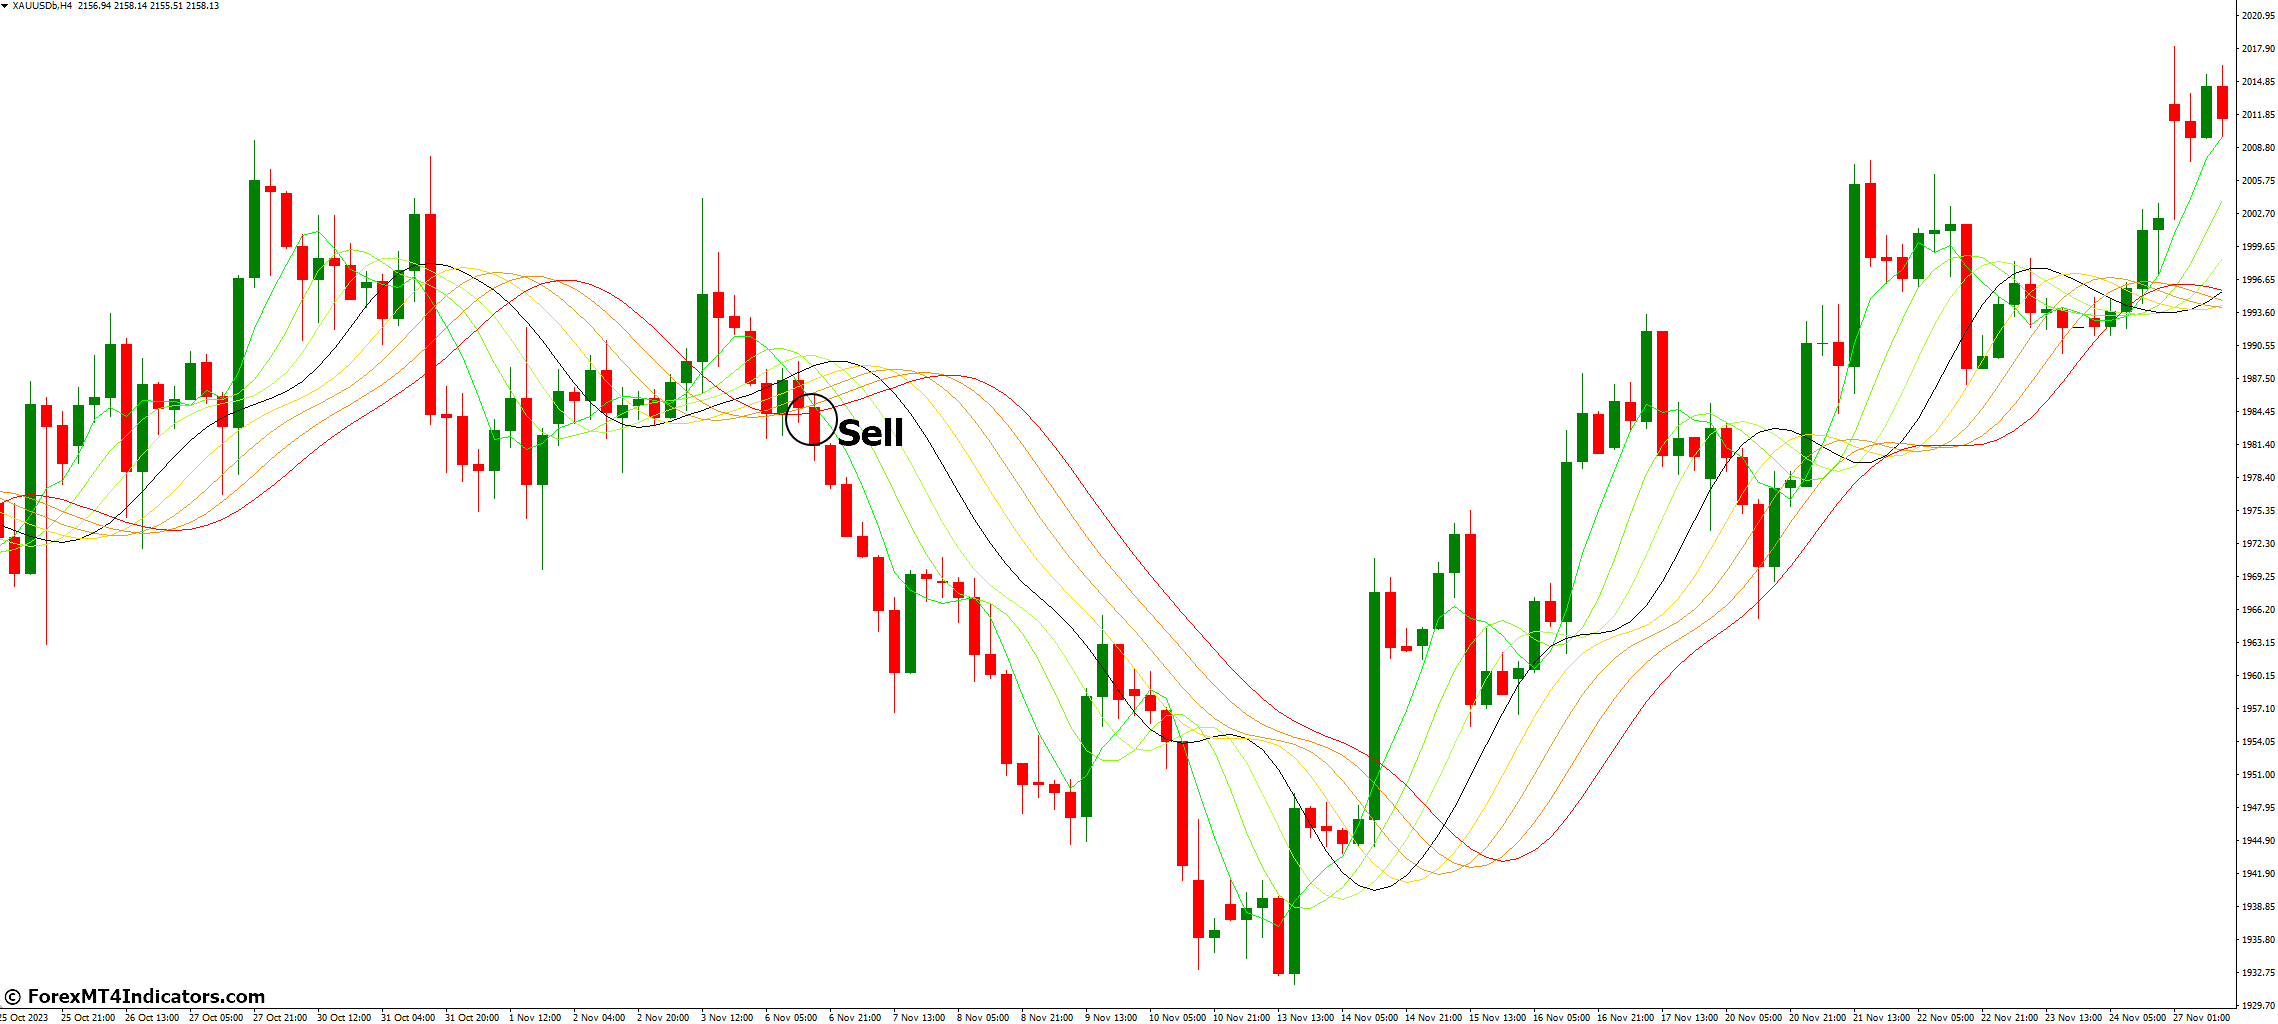 How to Trade with MA Rainbow Indicator - Sell Entry